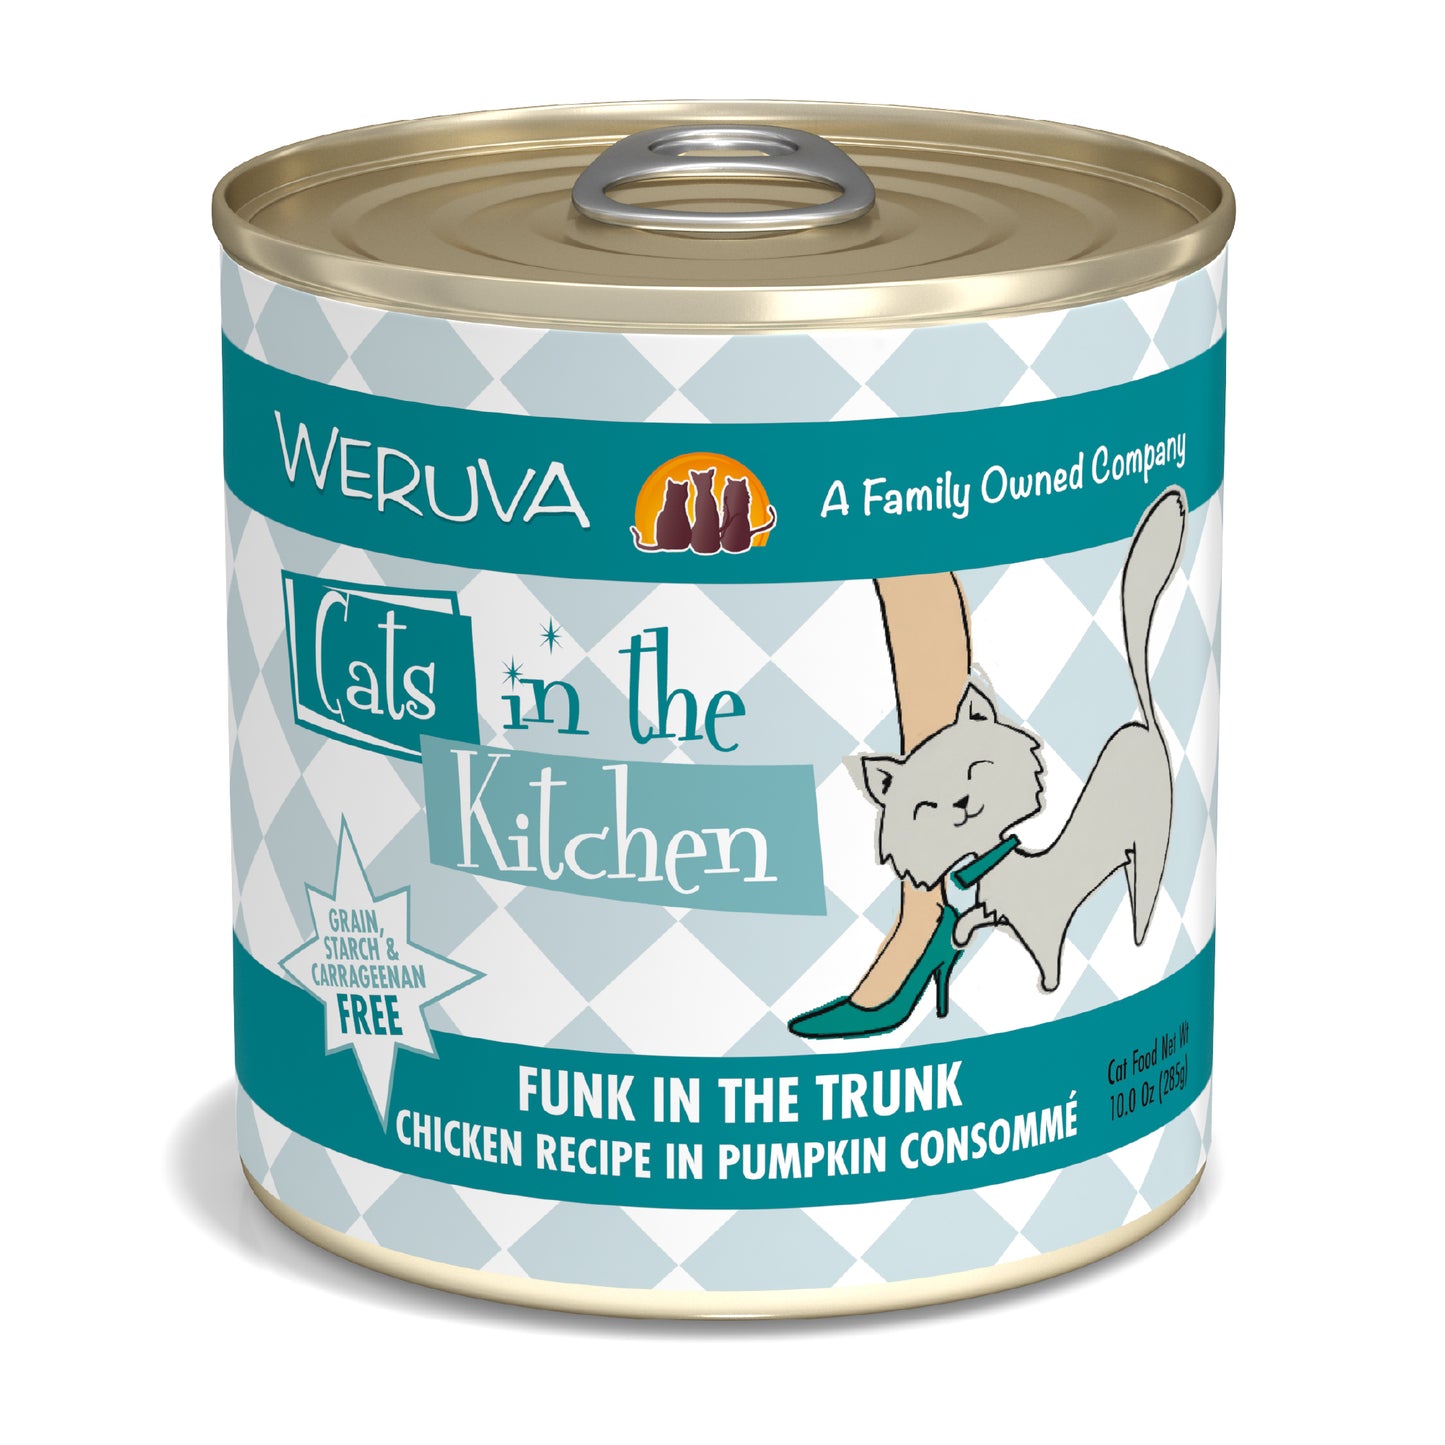 Weruva Cats in the Kitchen 10oz Canned Cat Food Funk in Trunk